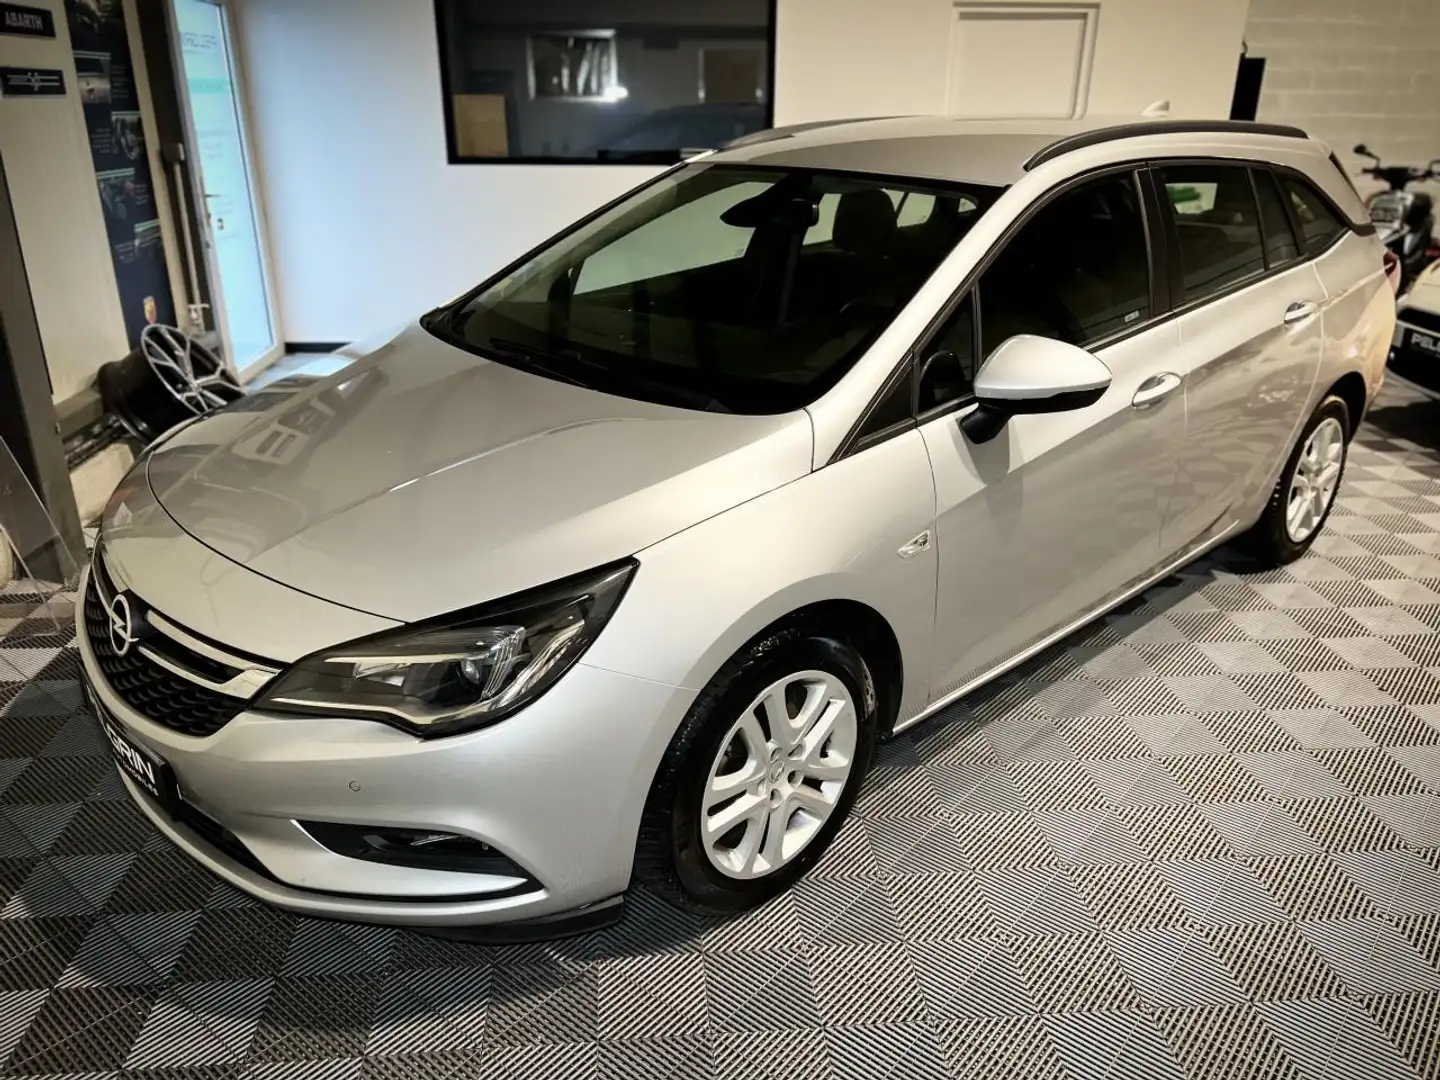 Opel Astra Sports Tourer 1.6 Cdti 110 Ch finition Edition - S Gris - 1